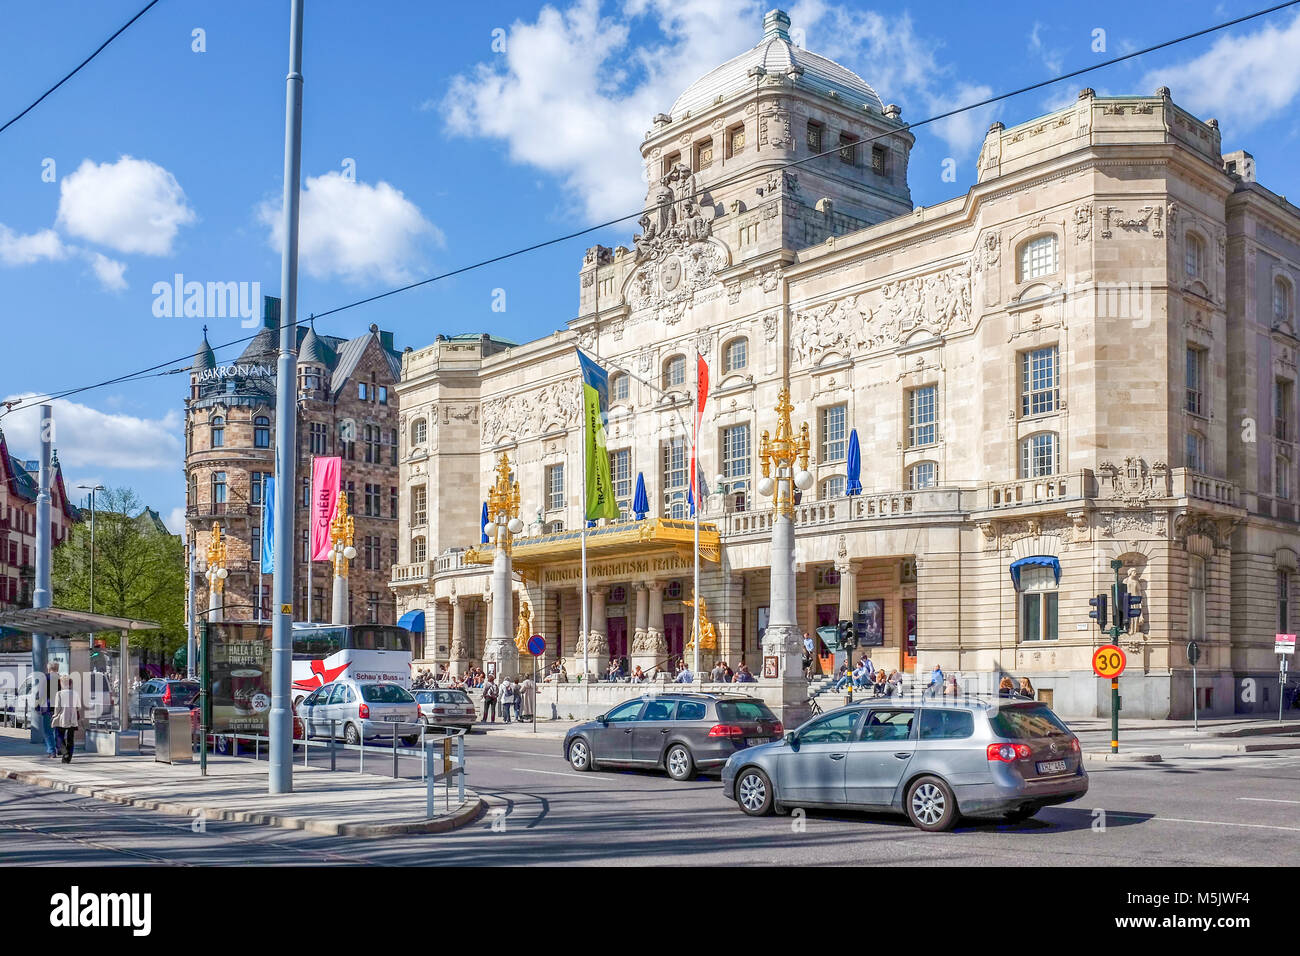 ”Dramaten” the Royal Dramatic theatre at Nybroplan during springtime in Stockhom. Stock Photo